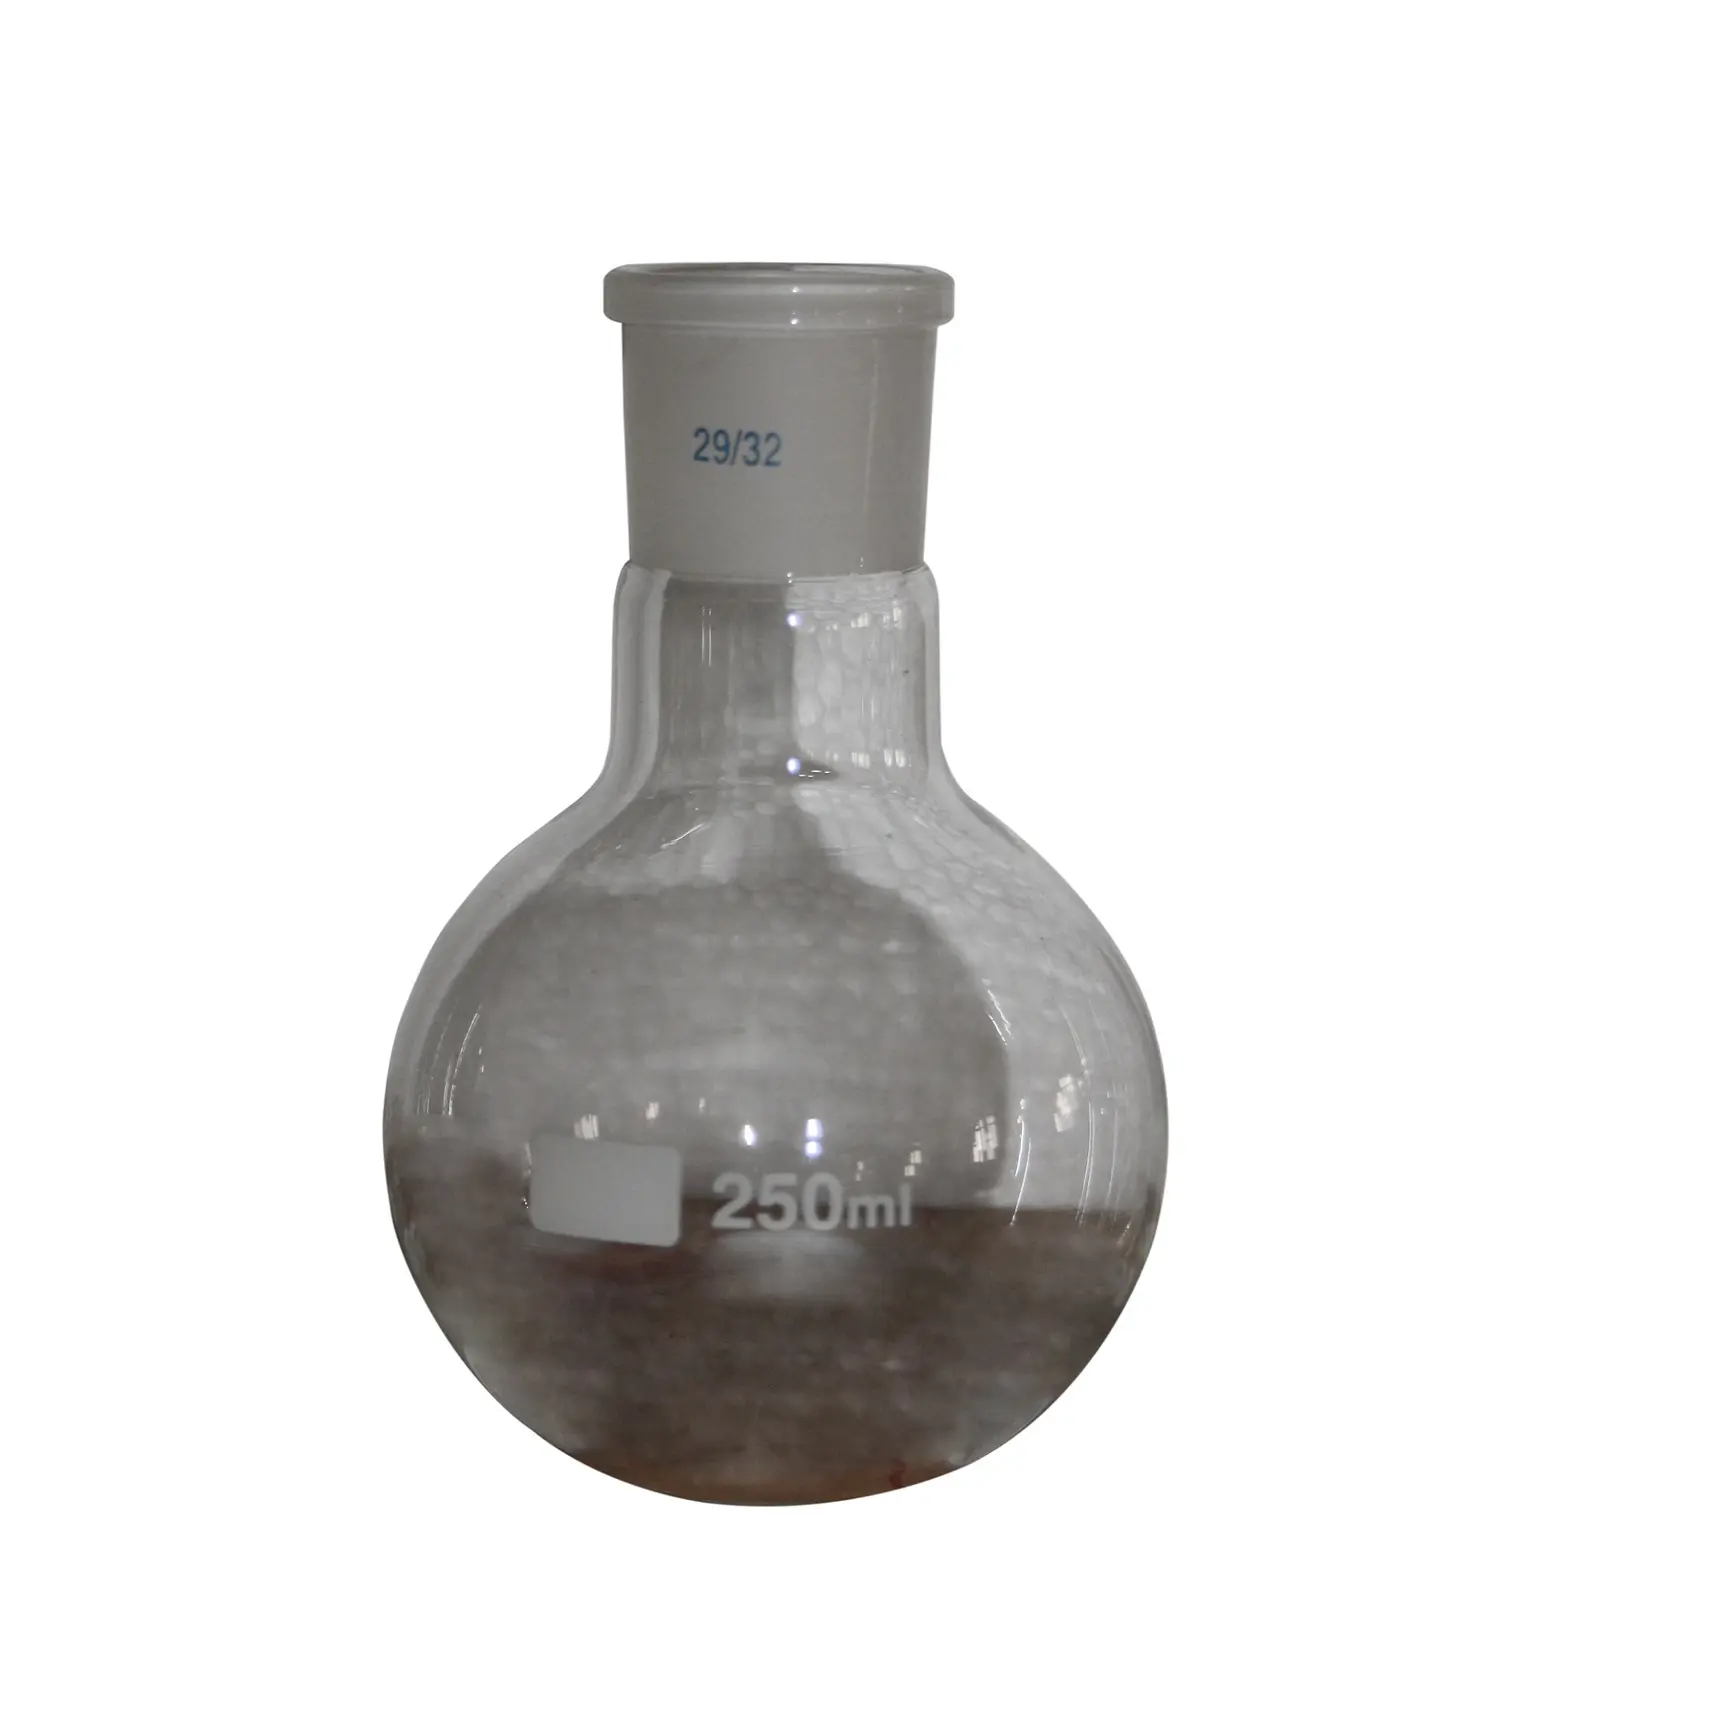 Laboratory Round Bottom Flask Narrow Neck / Boiling Short Neck Chemistry Flask Supplies Buy From Indian Supplier